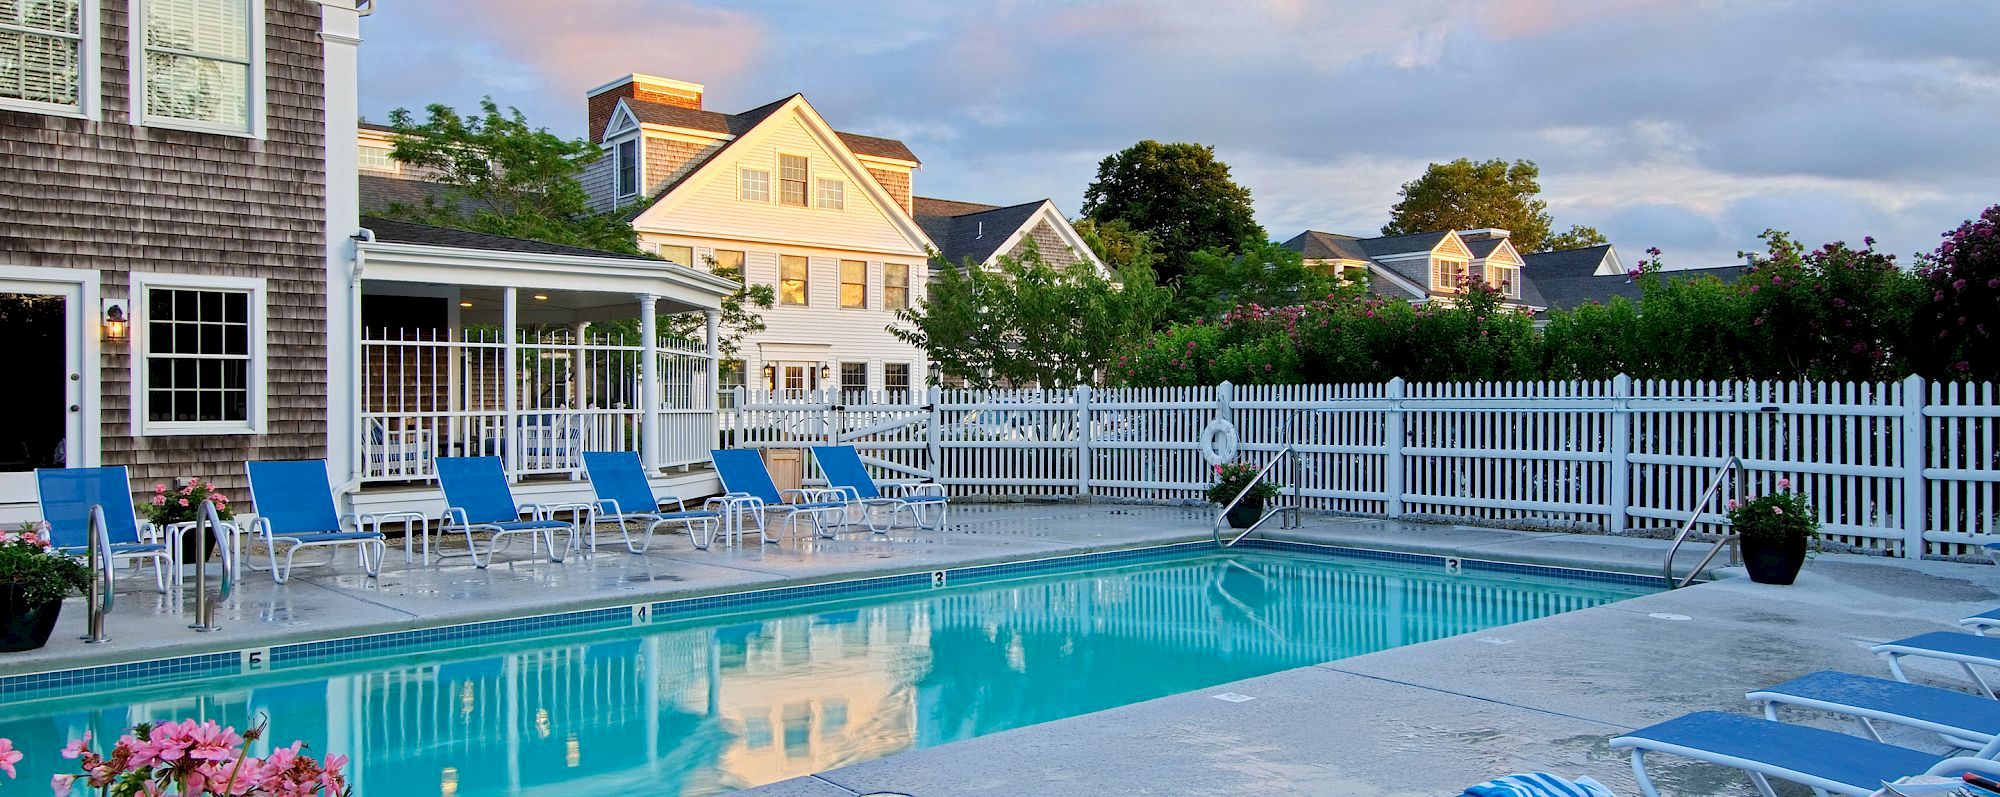 The image shows a serene outdoor swimming pool surrounded by blue lounge chairs, white fencing, and a charming backdrop of residential homes.